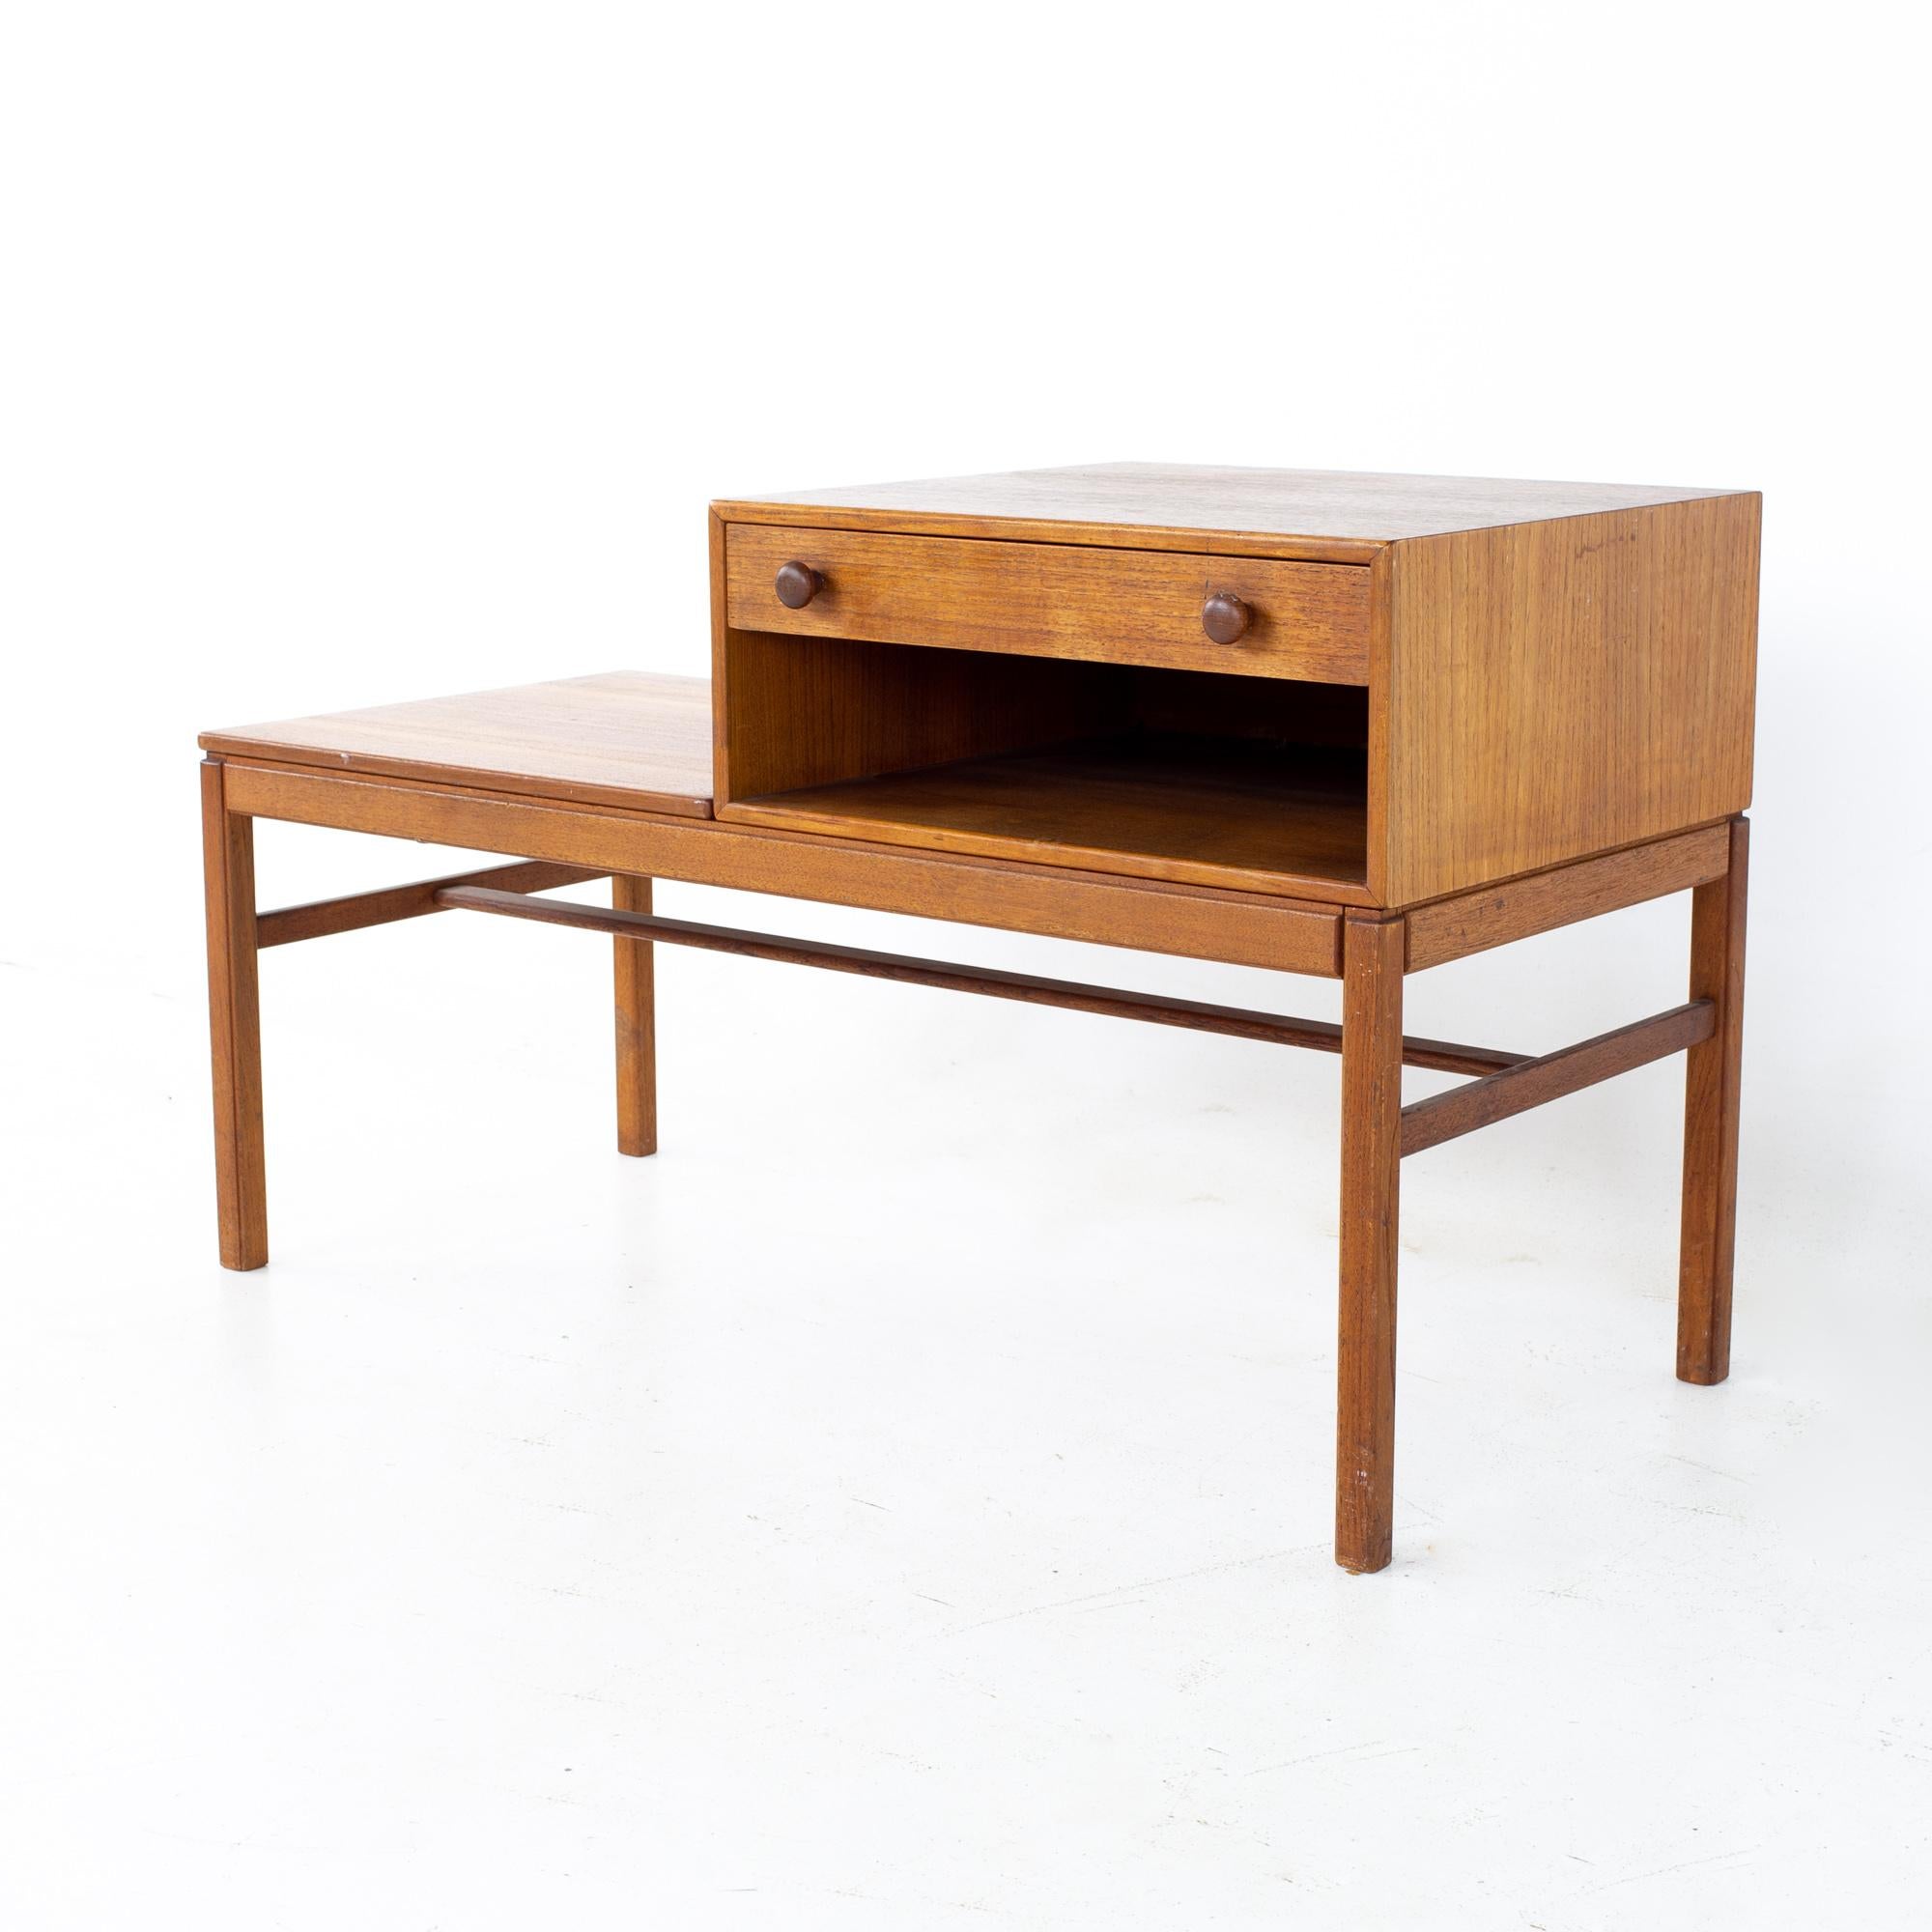 Sven Engstrom Mid Century Teak (Casino) Foyer Entry Bench

Table measures: 39.5 wide x 17.5 deep x 15.75 inches high; the height of the drawer is 23.25 inches

All pieces of furniture can be had in what we call restored vintage condition. That means